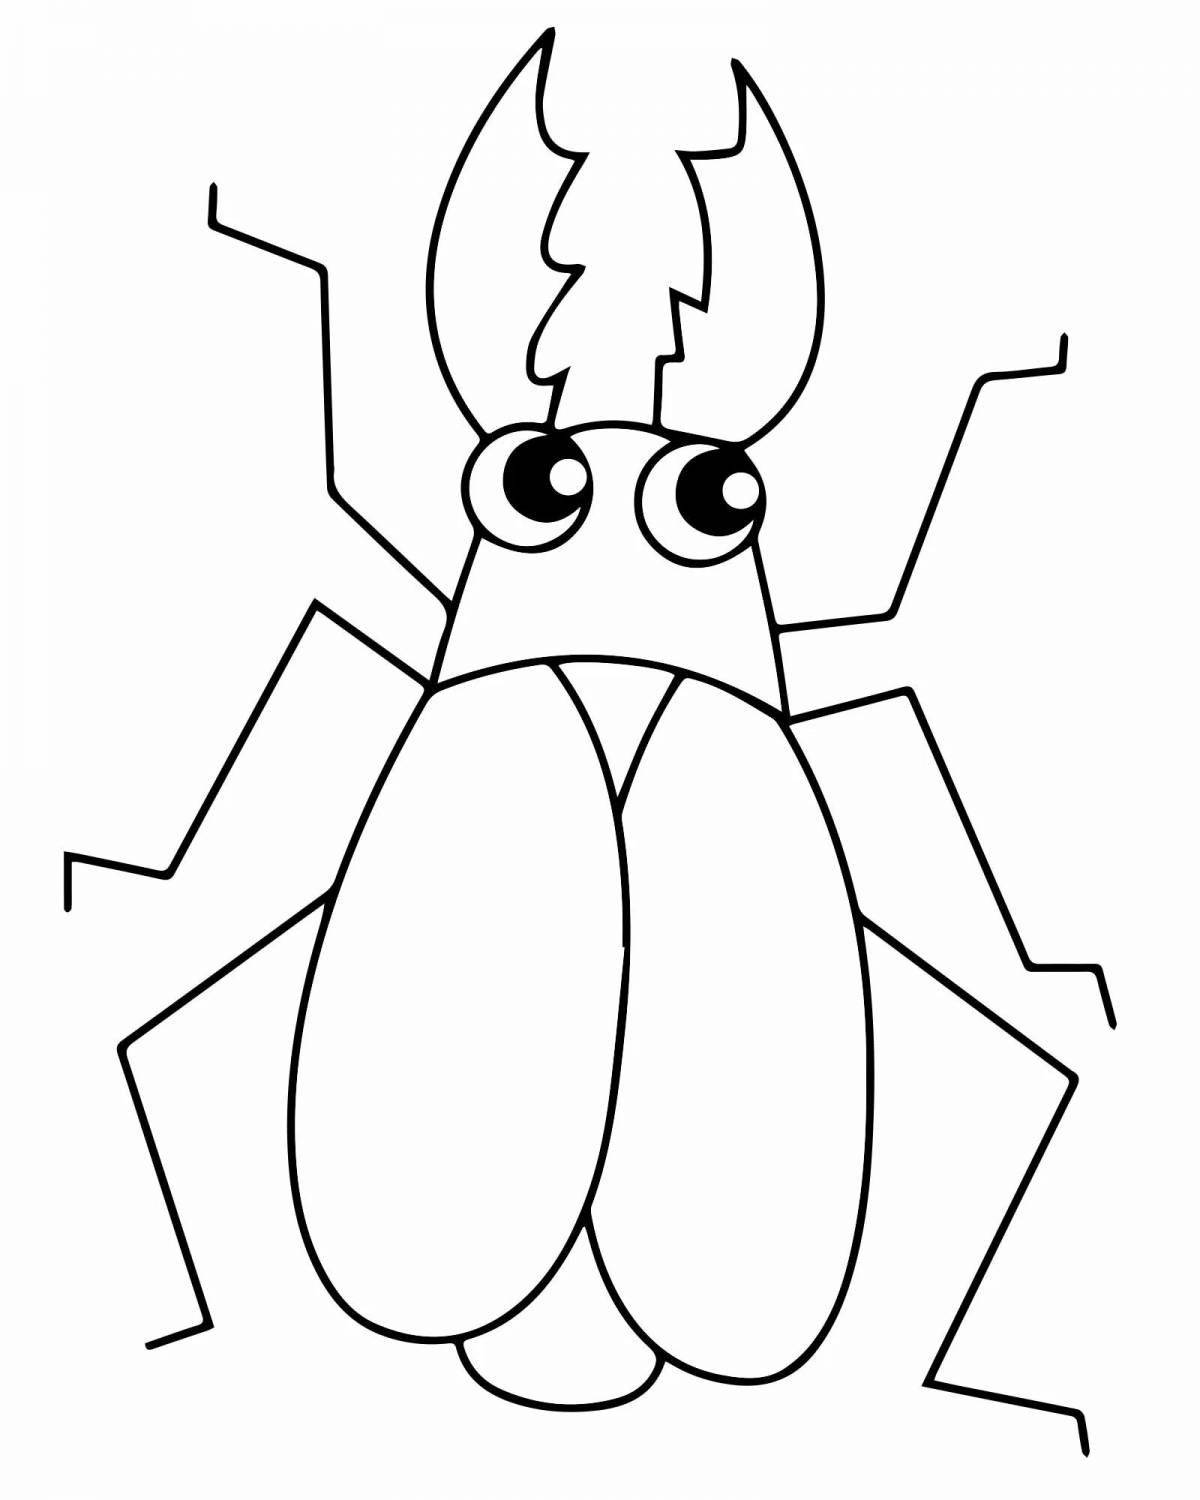 Wonderful coloring beetles for children 3-4 years old